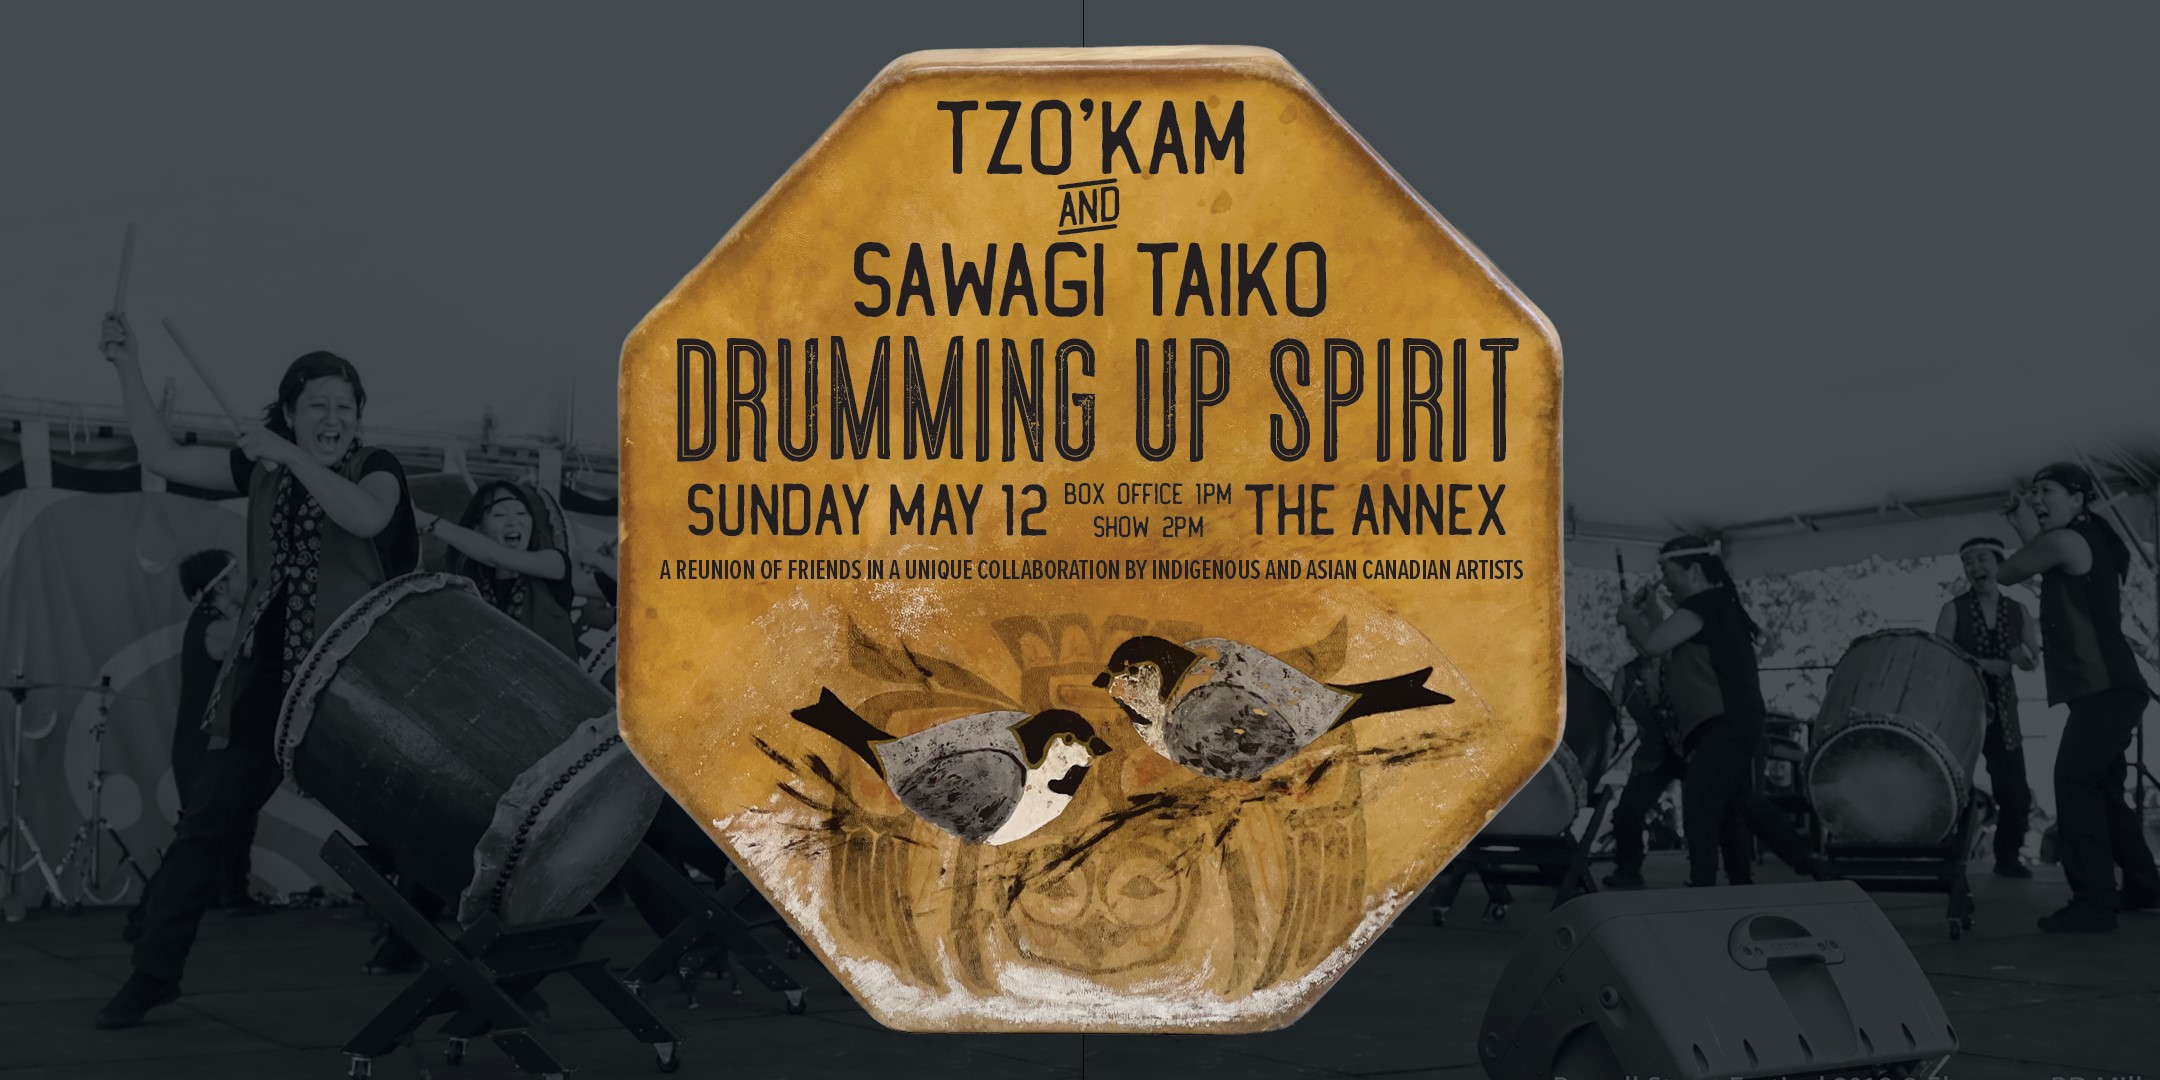 Drumming Up Spirit: Tzo'kam and Sawagi Taiko in concert at the Annex